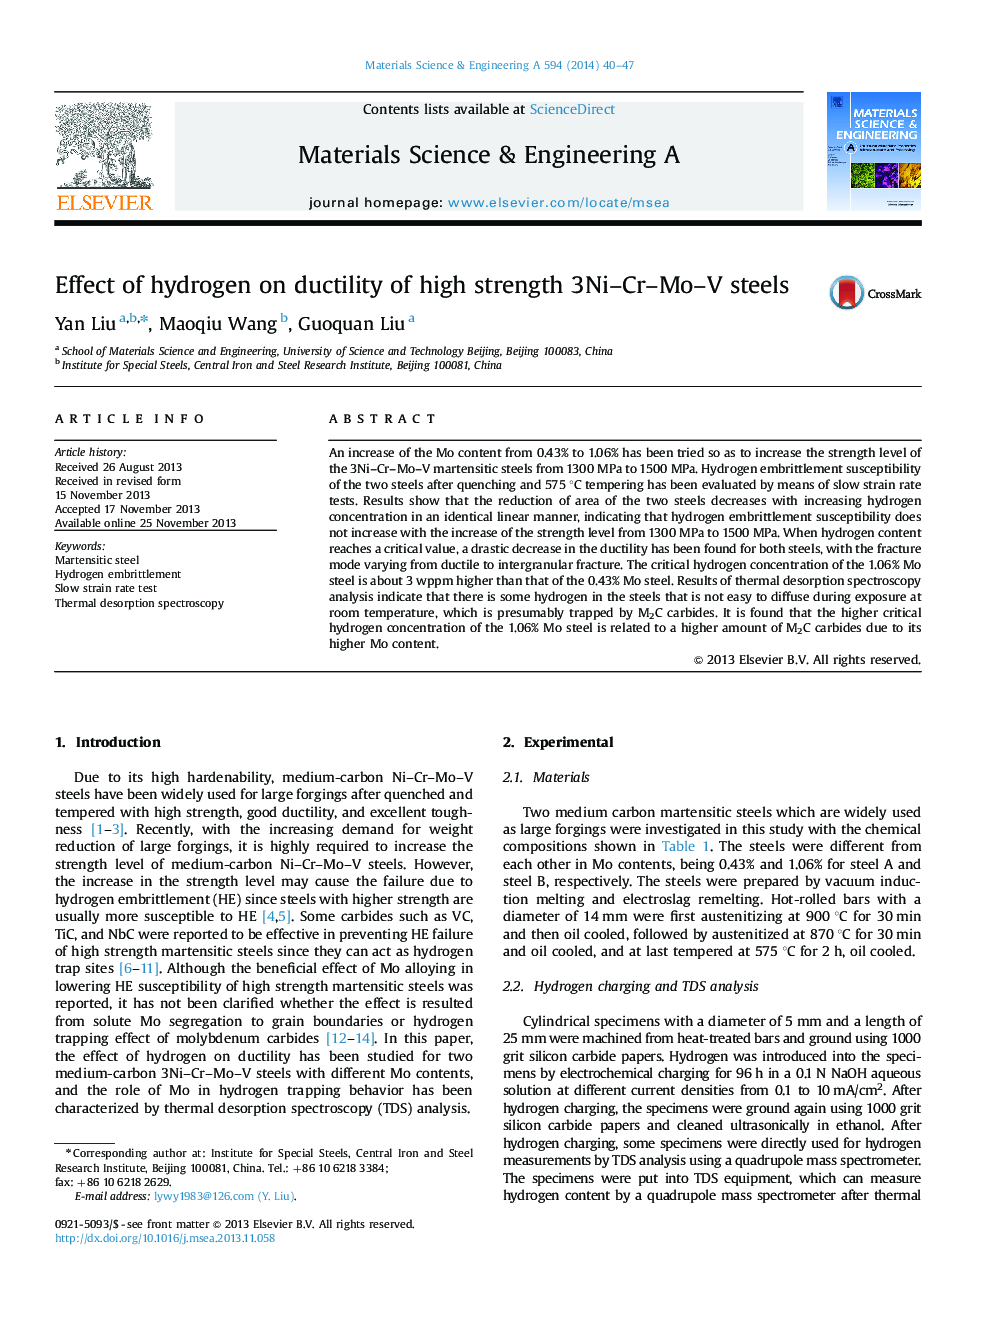 Effect of hydrogen on ductility of high strength 3Ni-Cr-Mo-V steels